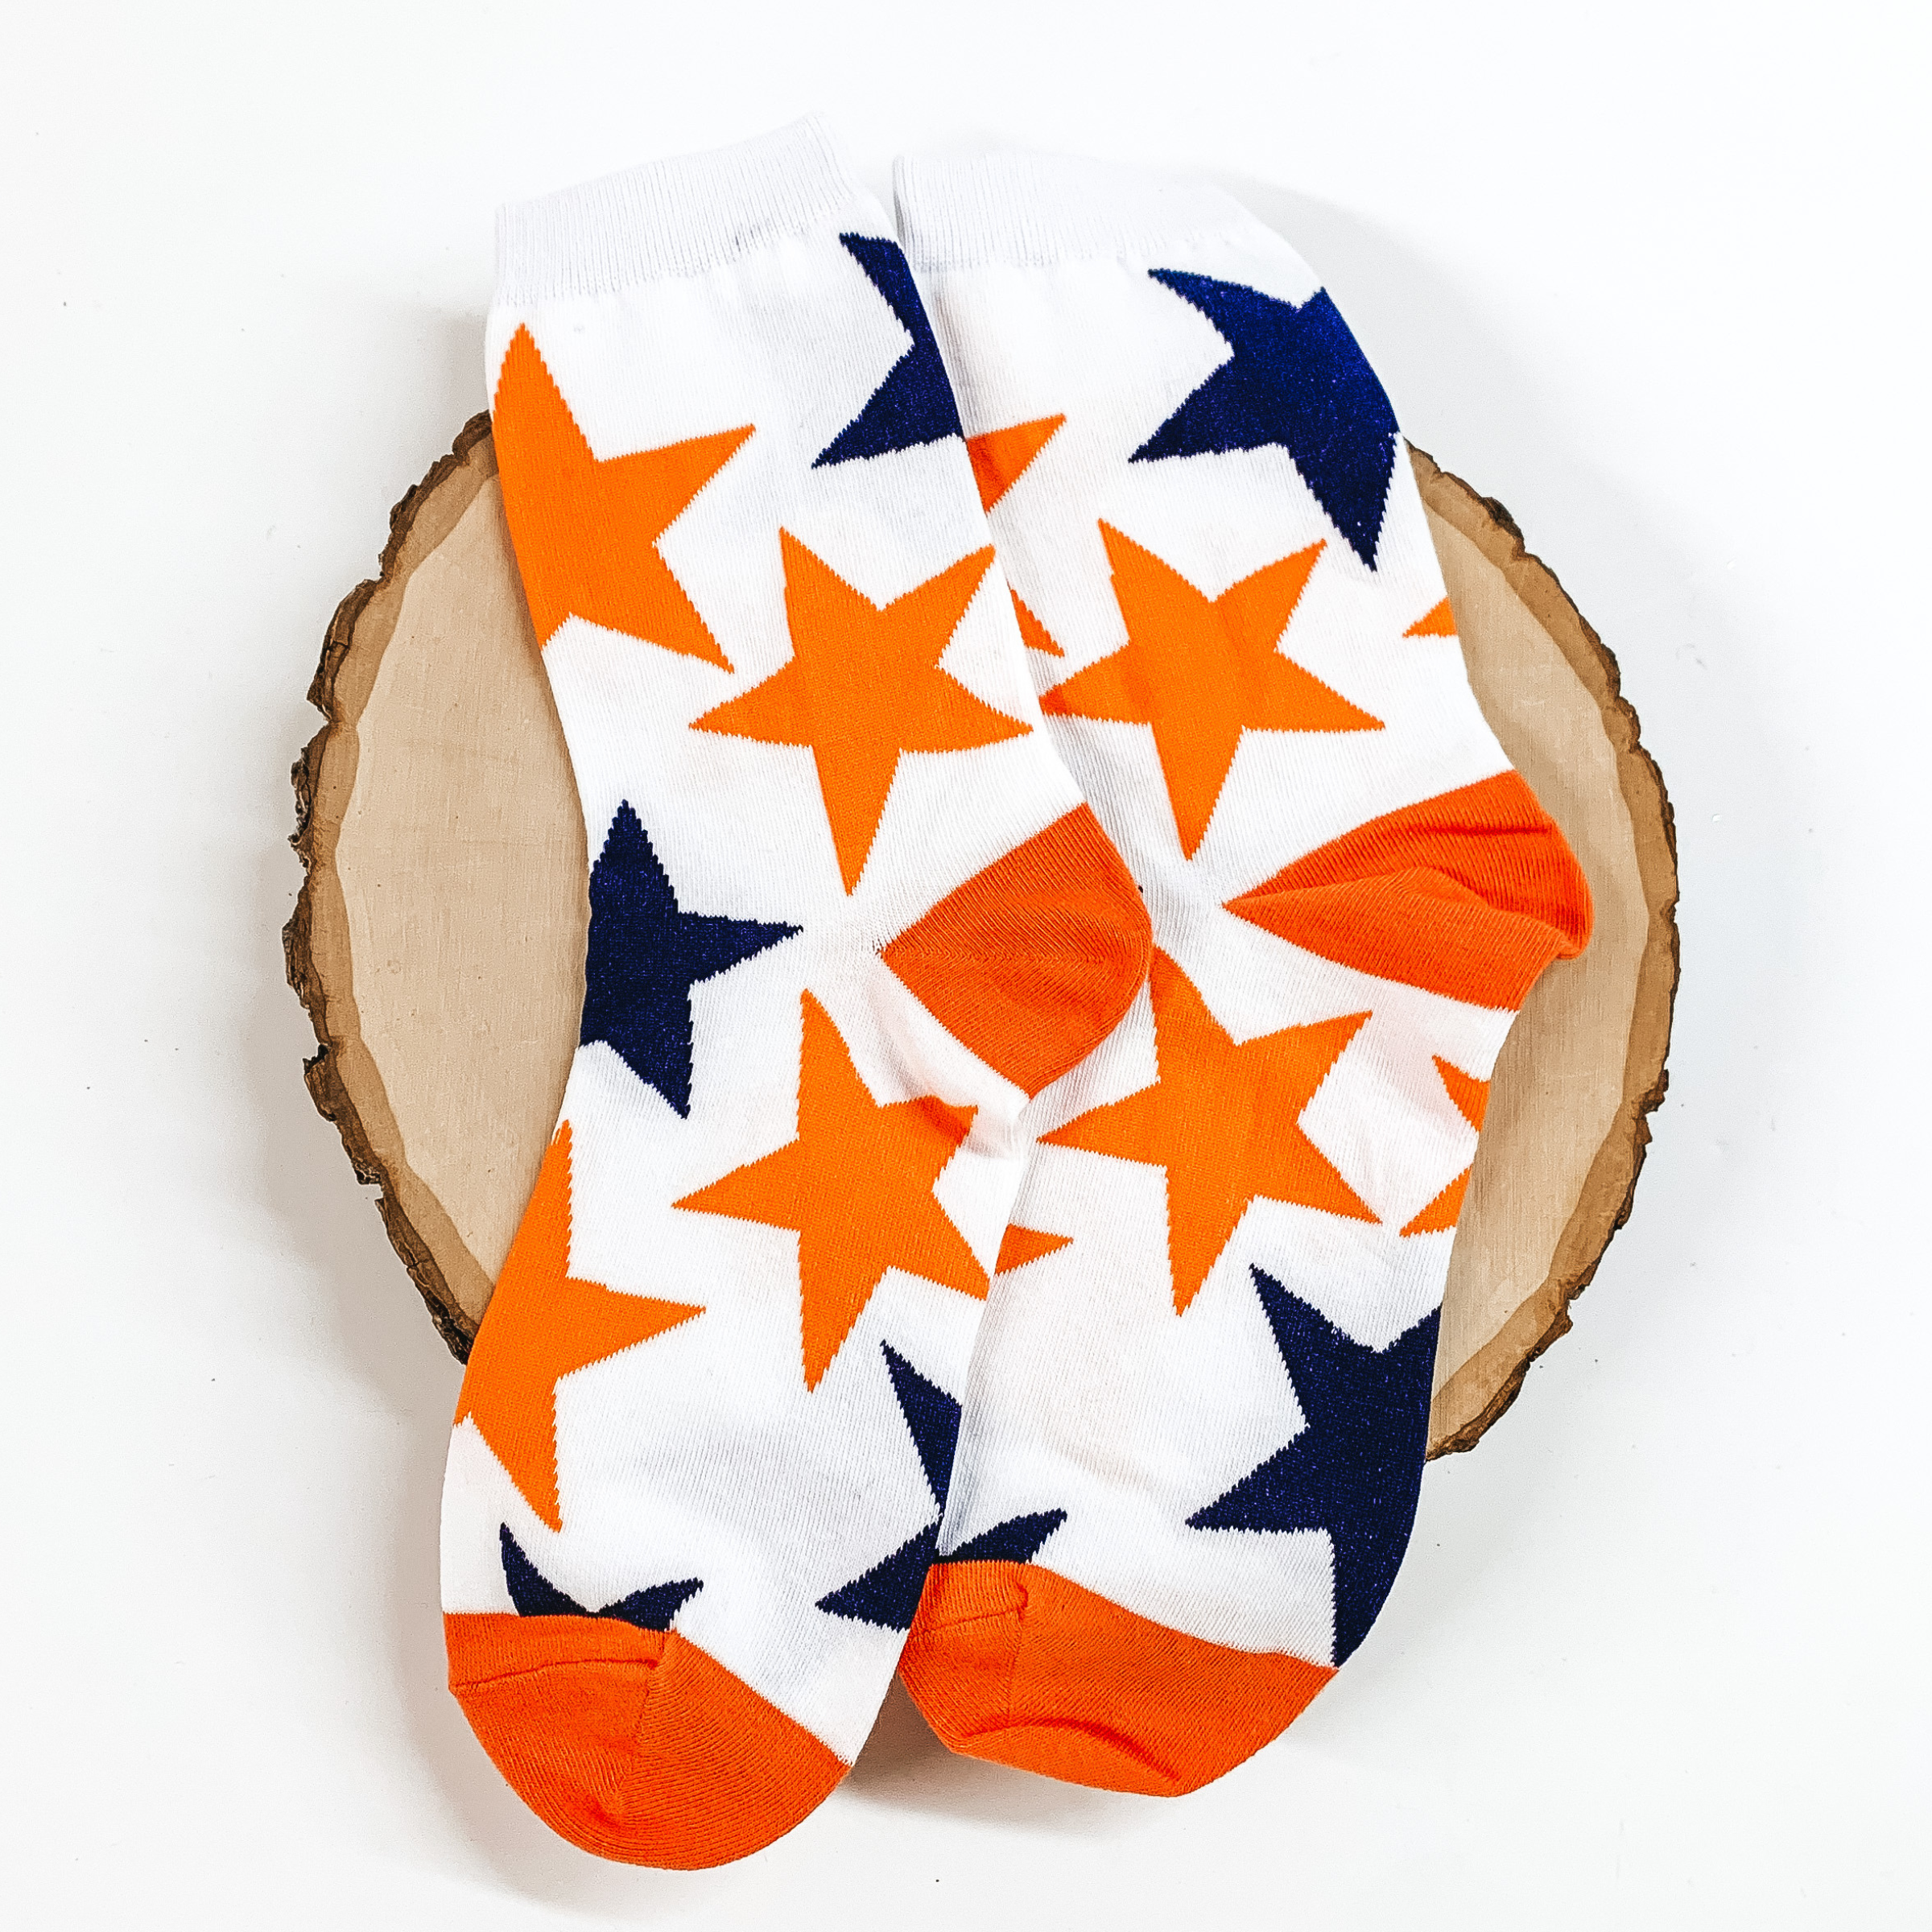 White ankle socks with a navy and orange star print design. These socks are pictured on a piece of wood on a white background. 